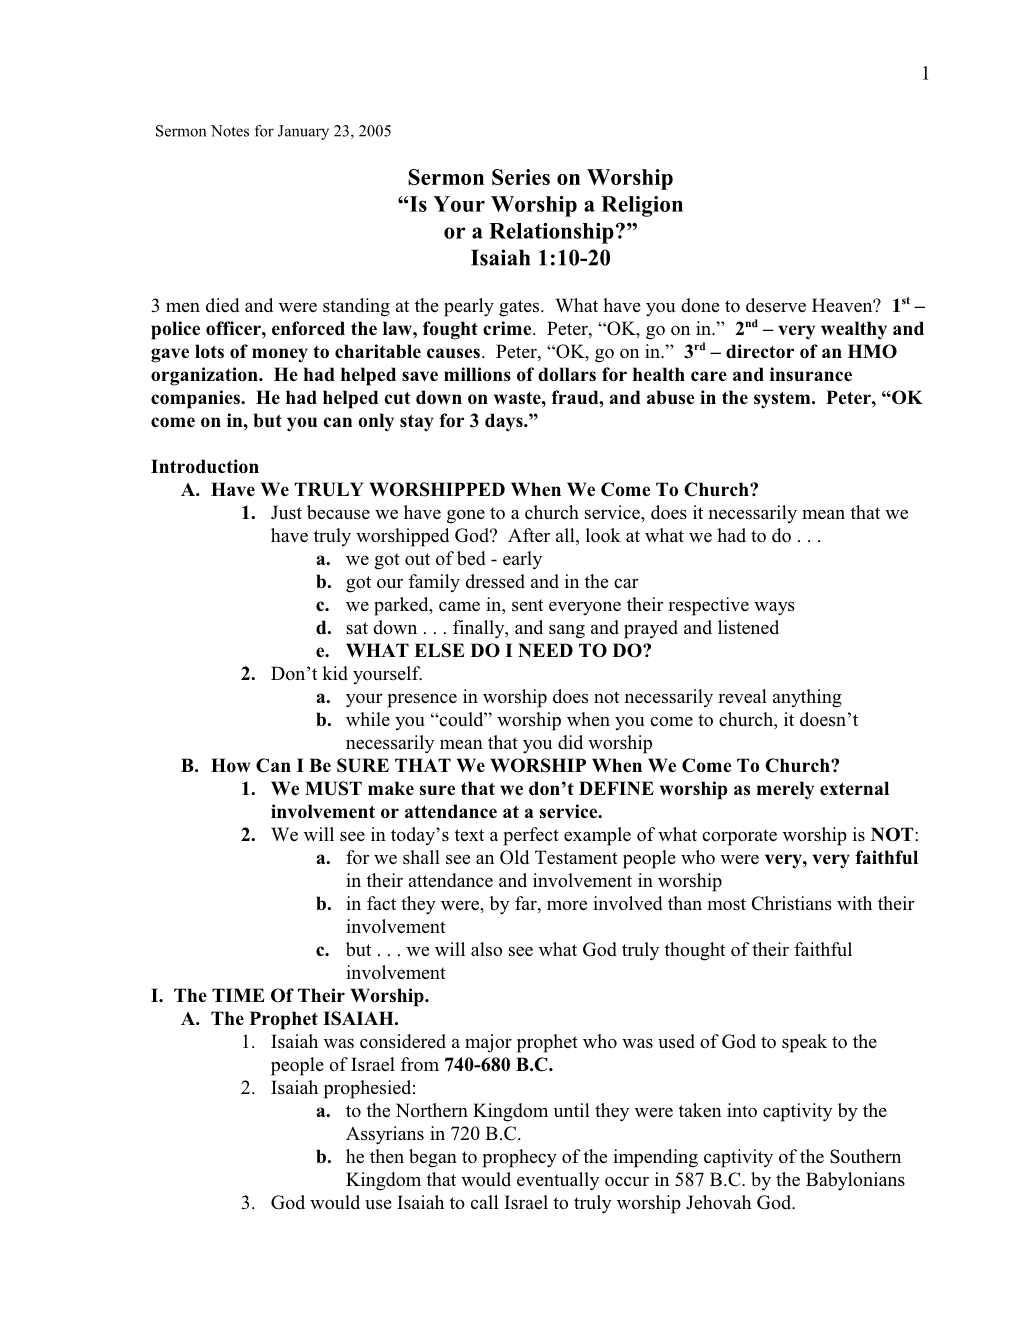 Sermon Notes for January 23, 2005